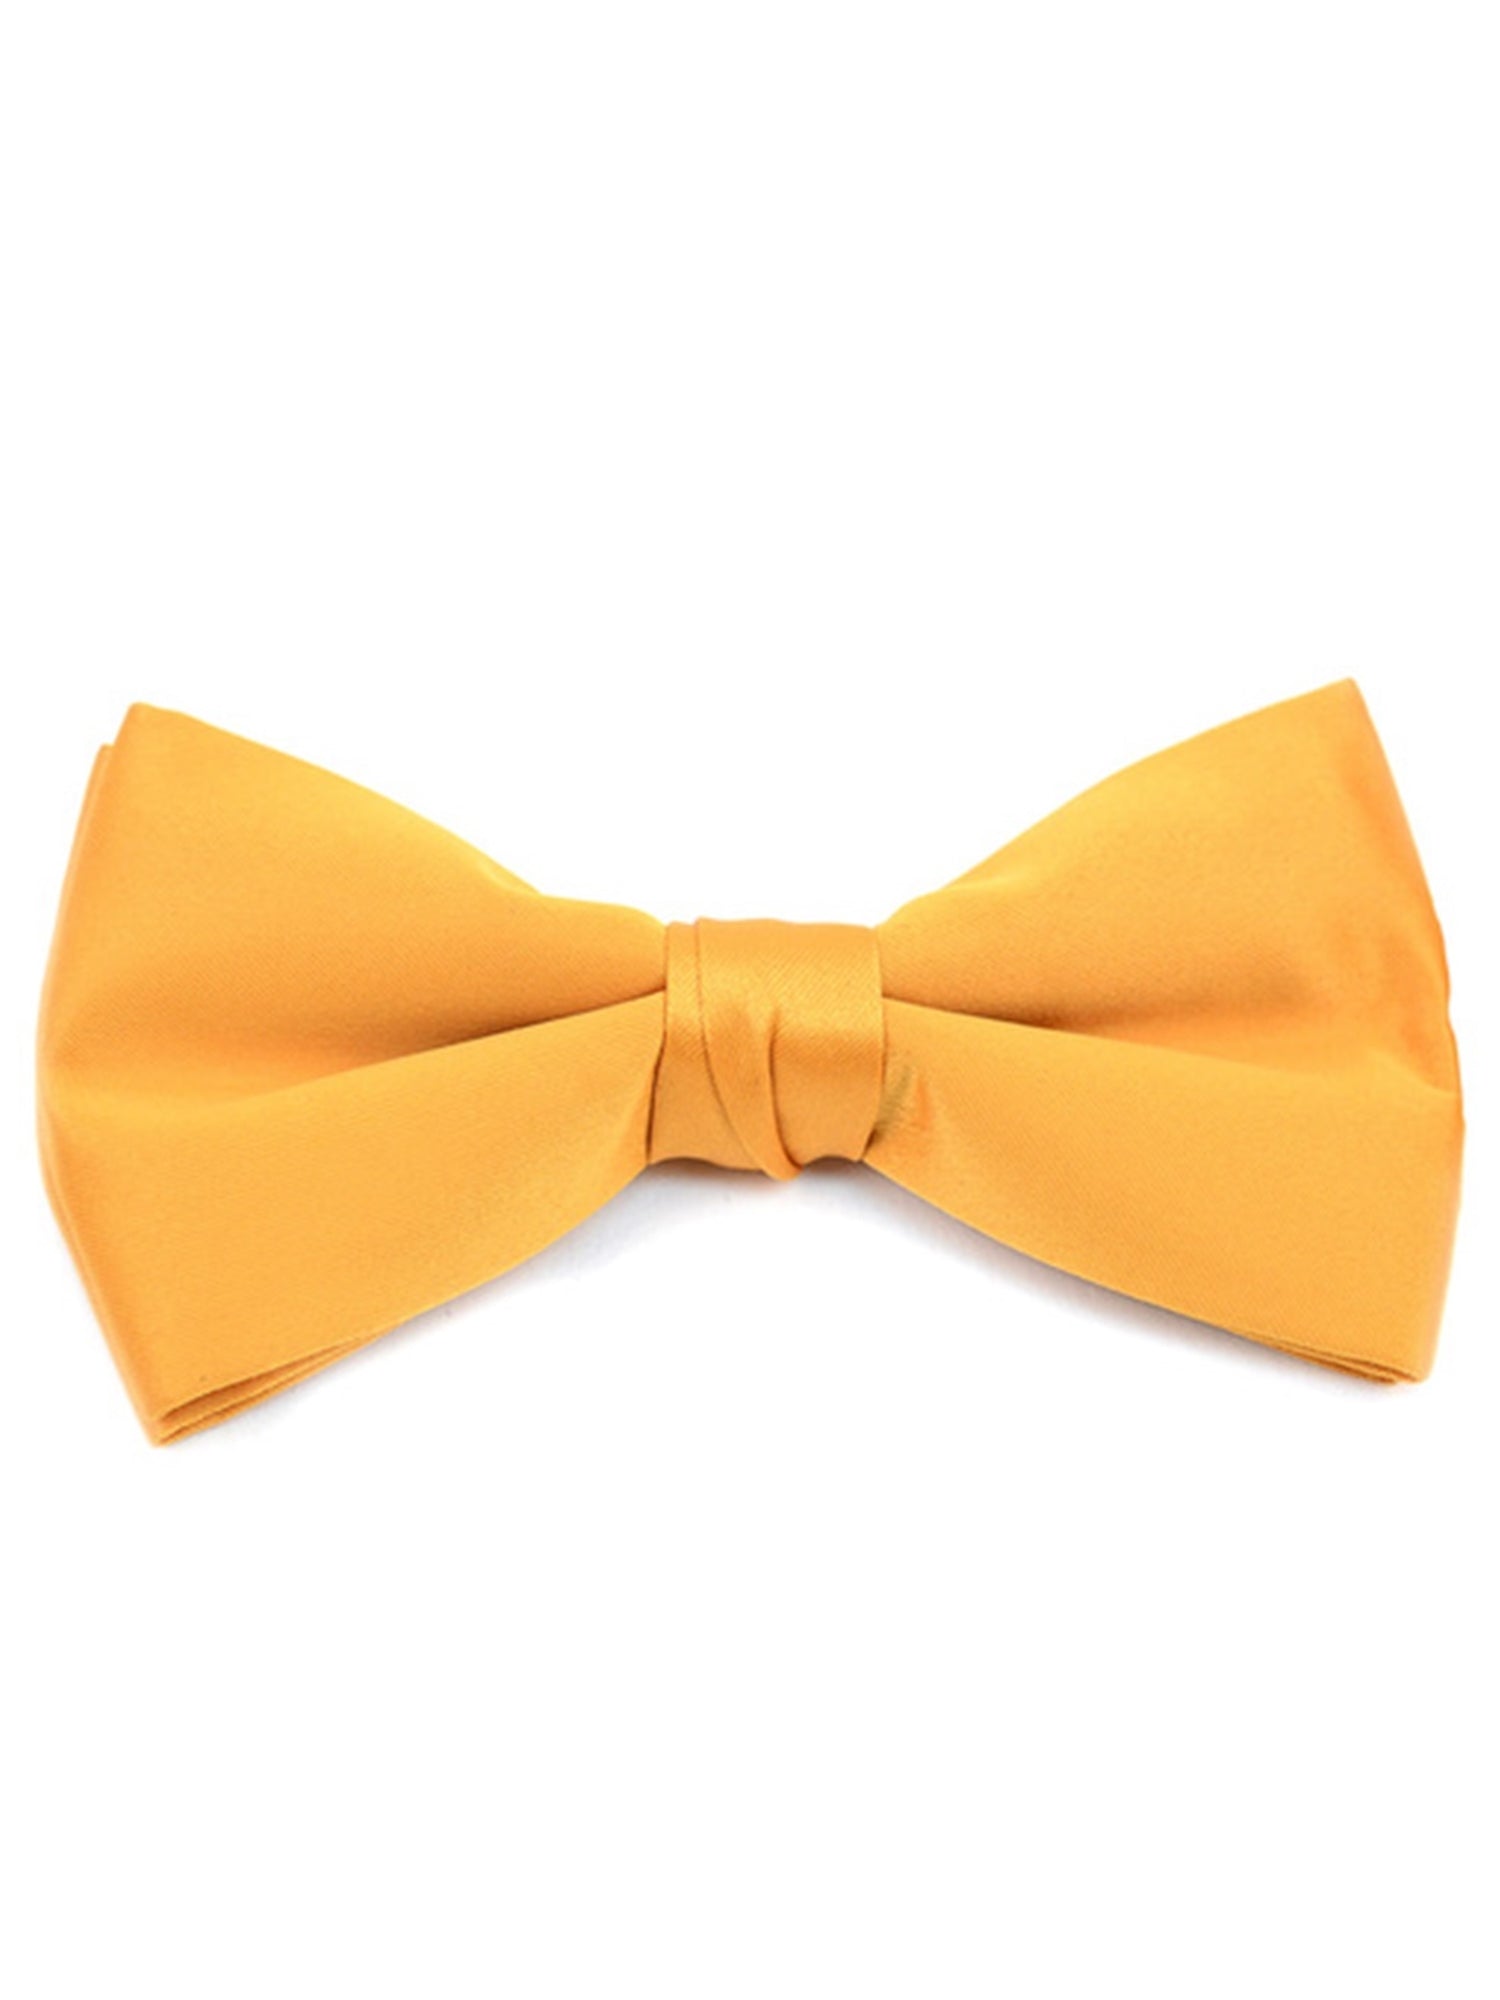 Men's Pre-tied Clip On Bow Tie - Formal Tuxedo Solid Color Men's Solid Color Bow Tie TheDapperTie Gold One Size 